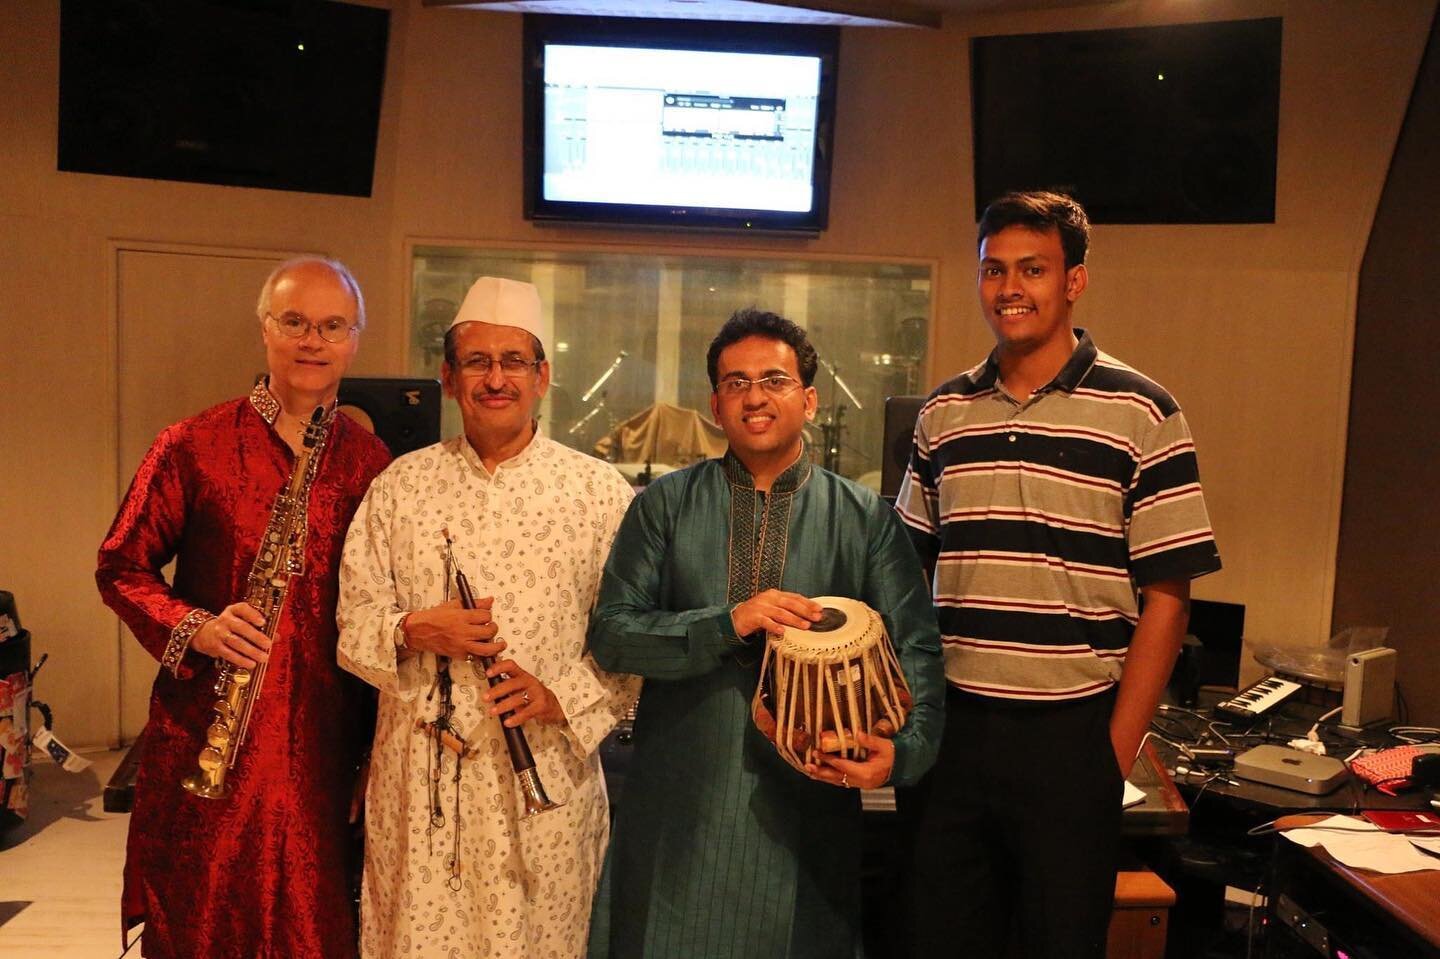 Throwback to our recording session with the legendary @shaileshbhag @bhushan_parchure and #phil #scarff 

Recorded by @ashishmanchanda007 and @aman_moroney